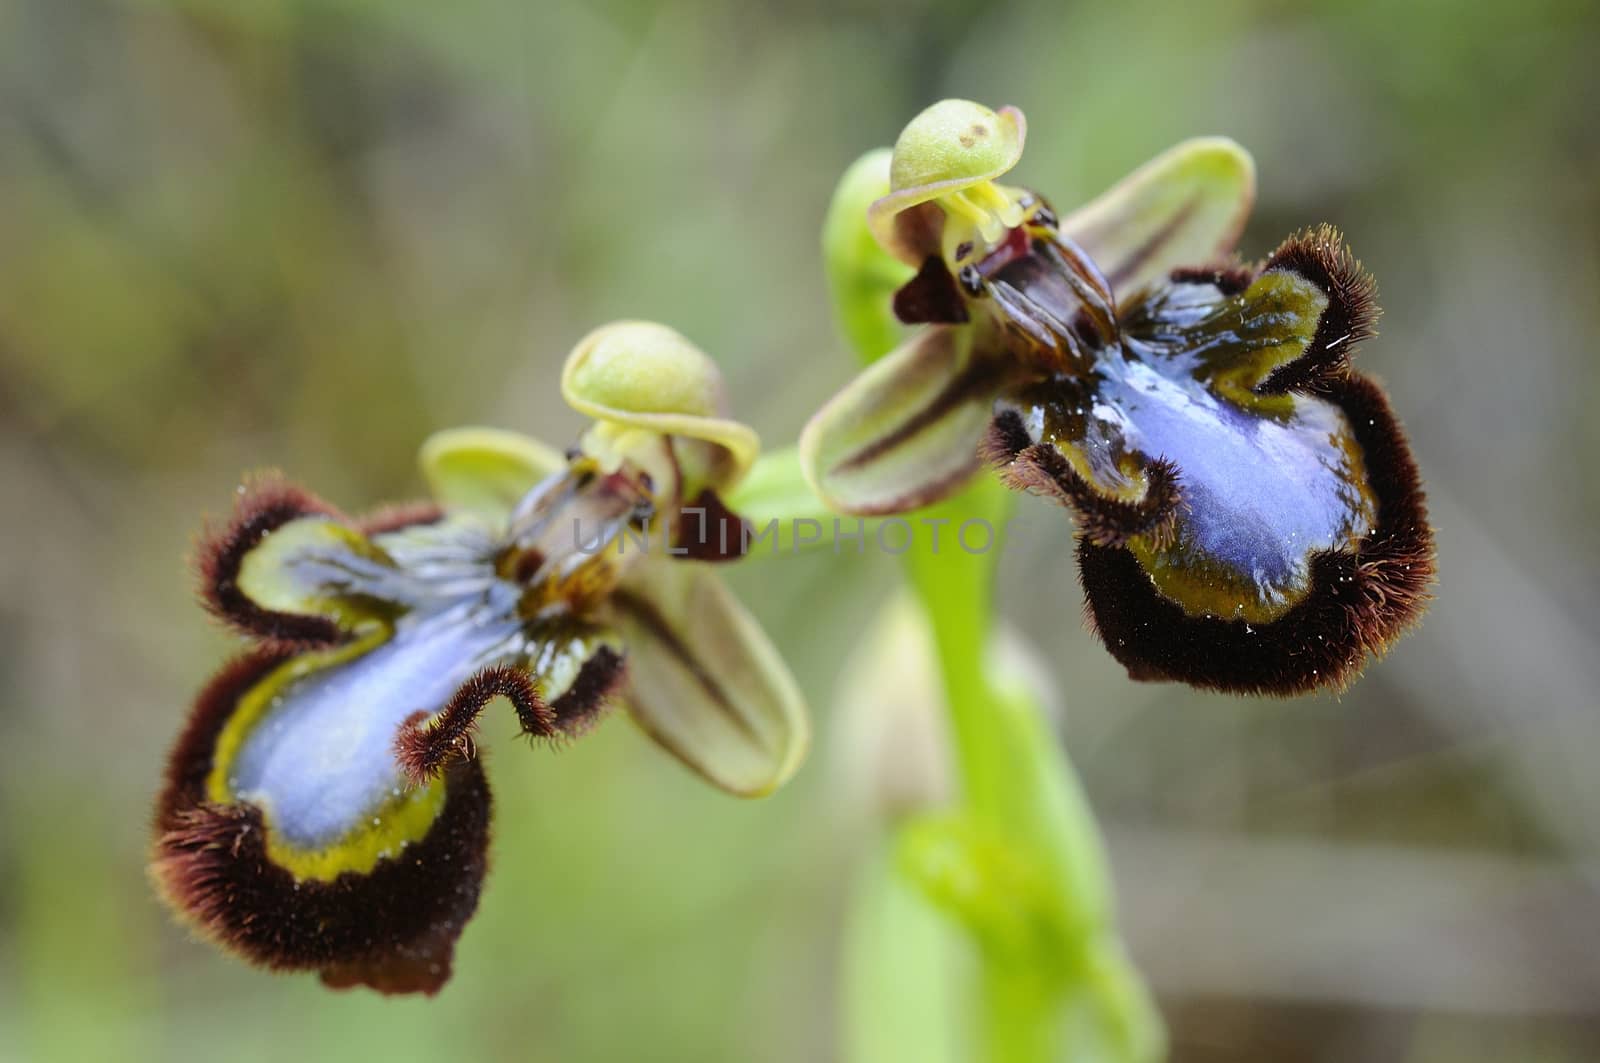 Wild orchid from southern Western Europe, Ophrys speculum